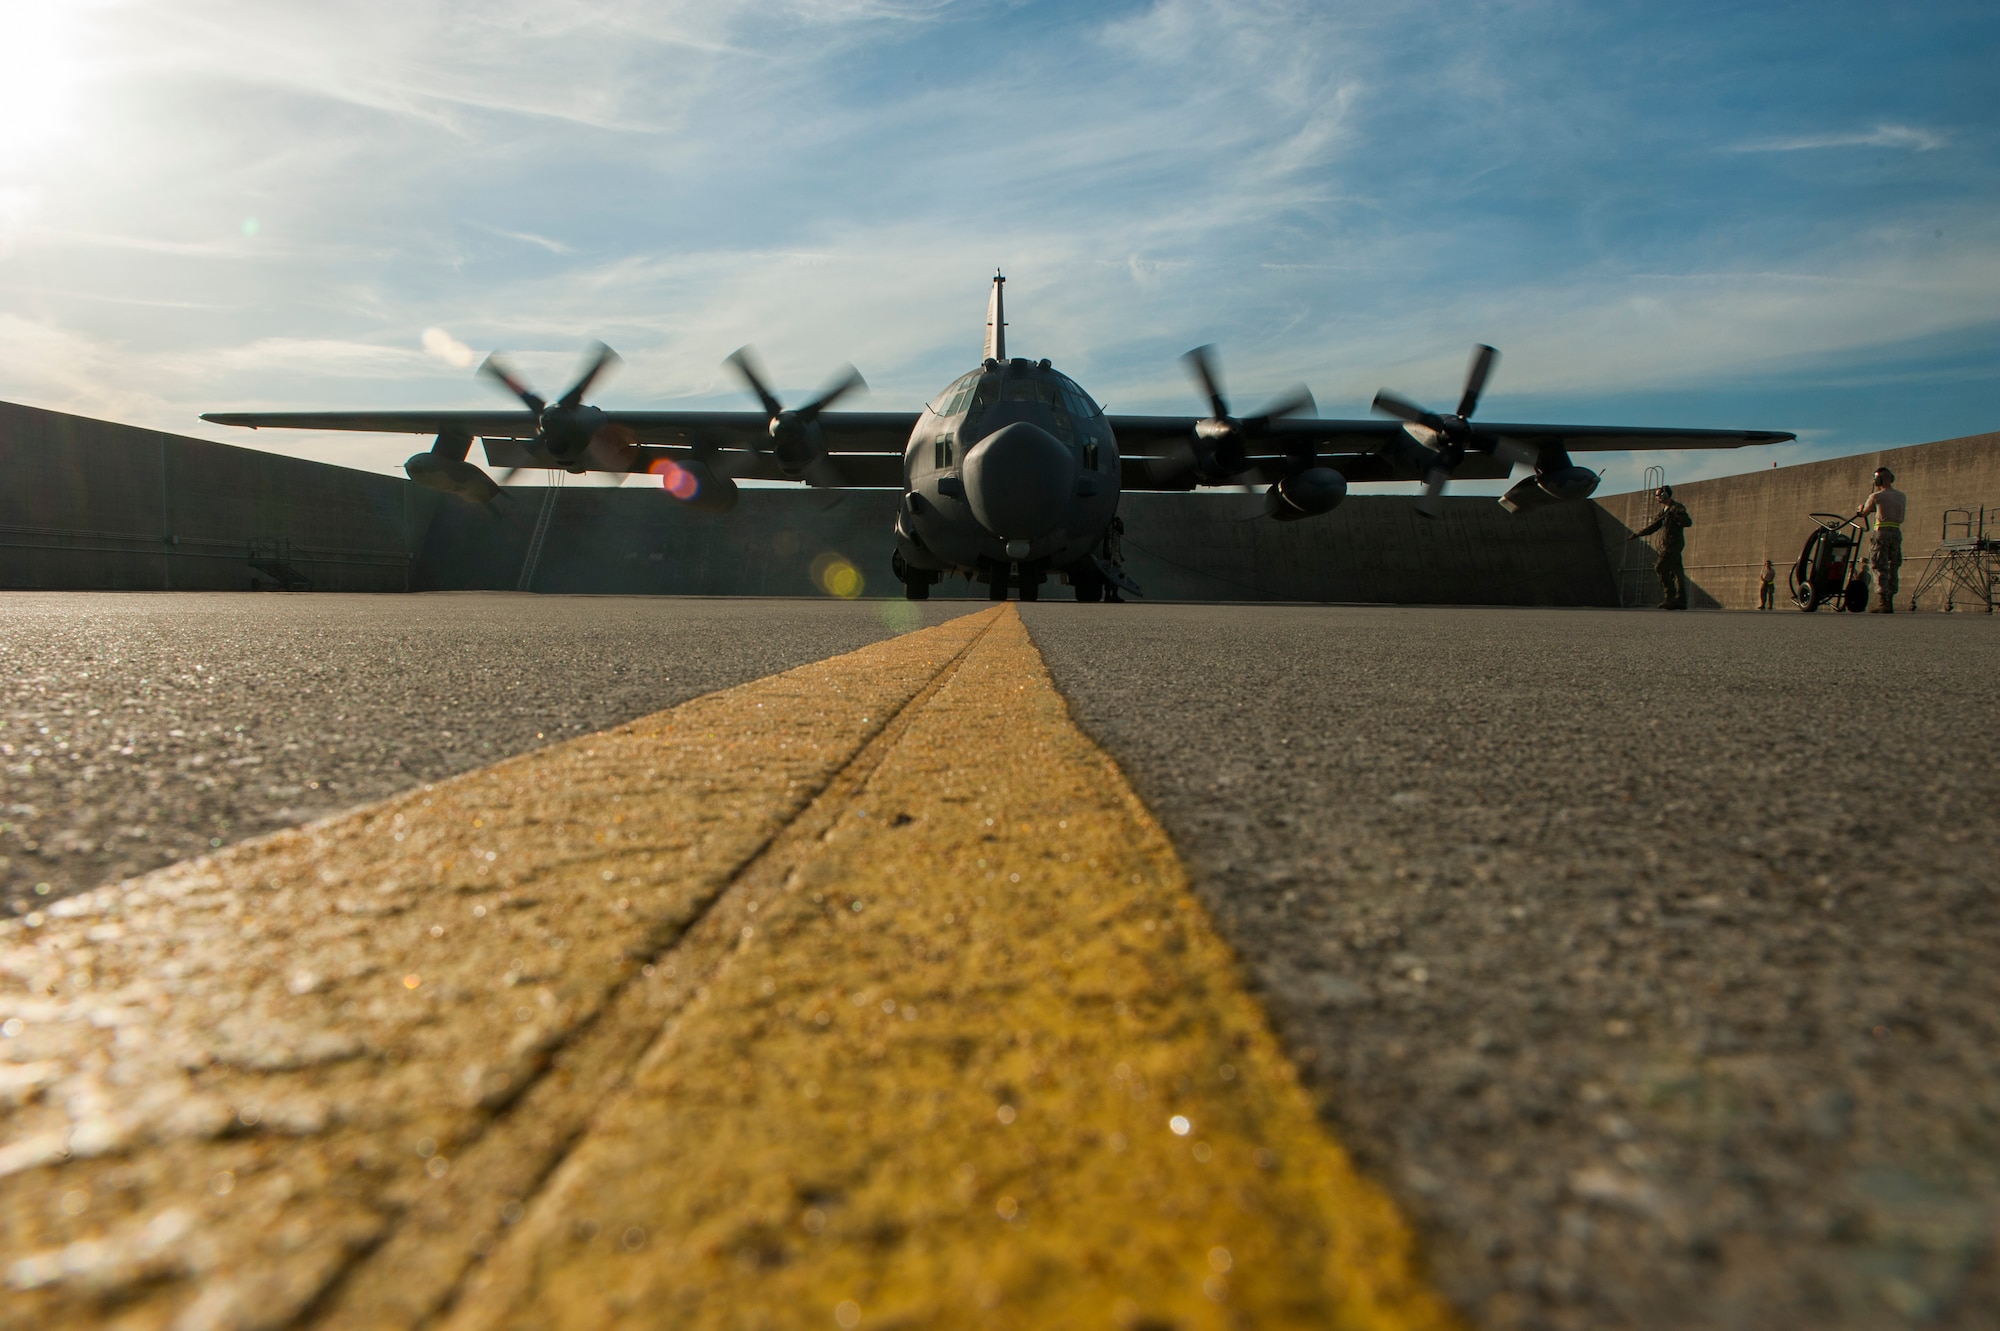 A U.S. Air Force MC-130H Combat Talon II from the 1st Special Operations Squadron starts engines for takeoff on the Kadena Air Base, Japan, flightline May 14, 2015.  The 1st Special Operations Squadron is one of five squadrons that make up the 353rd Special Operations Group.  As the only Air Force special operations group in the Pacific, they are the focal point for Air Force special operations activities throughout the United States Pacific Command Theater.  (U.S. Air Force photo by Senior Airman Stephen G. Eigel)